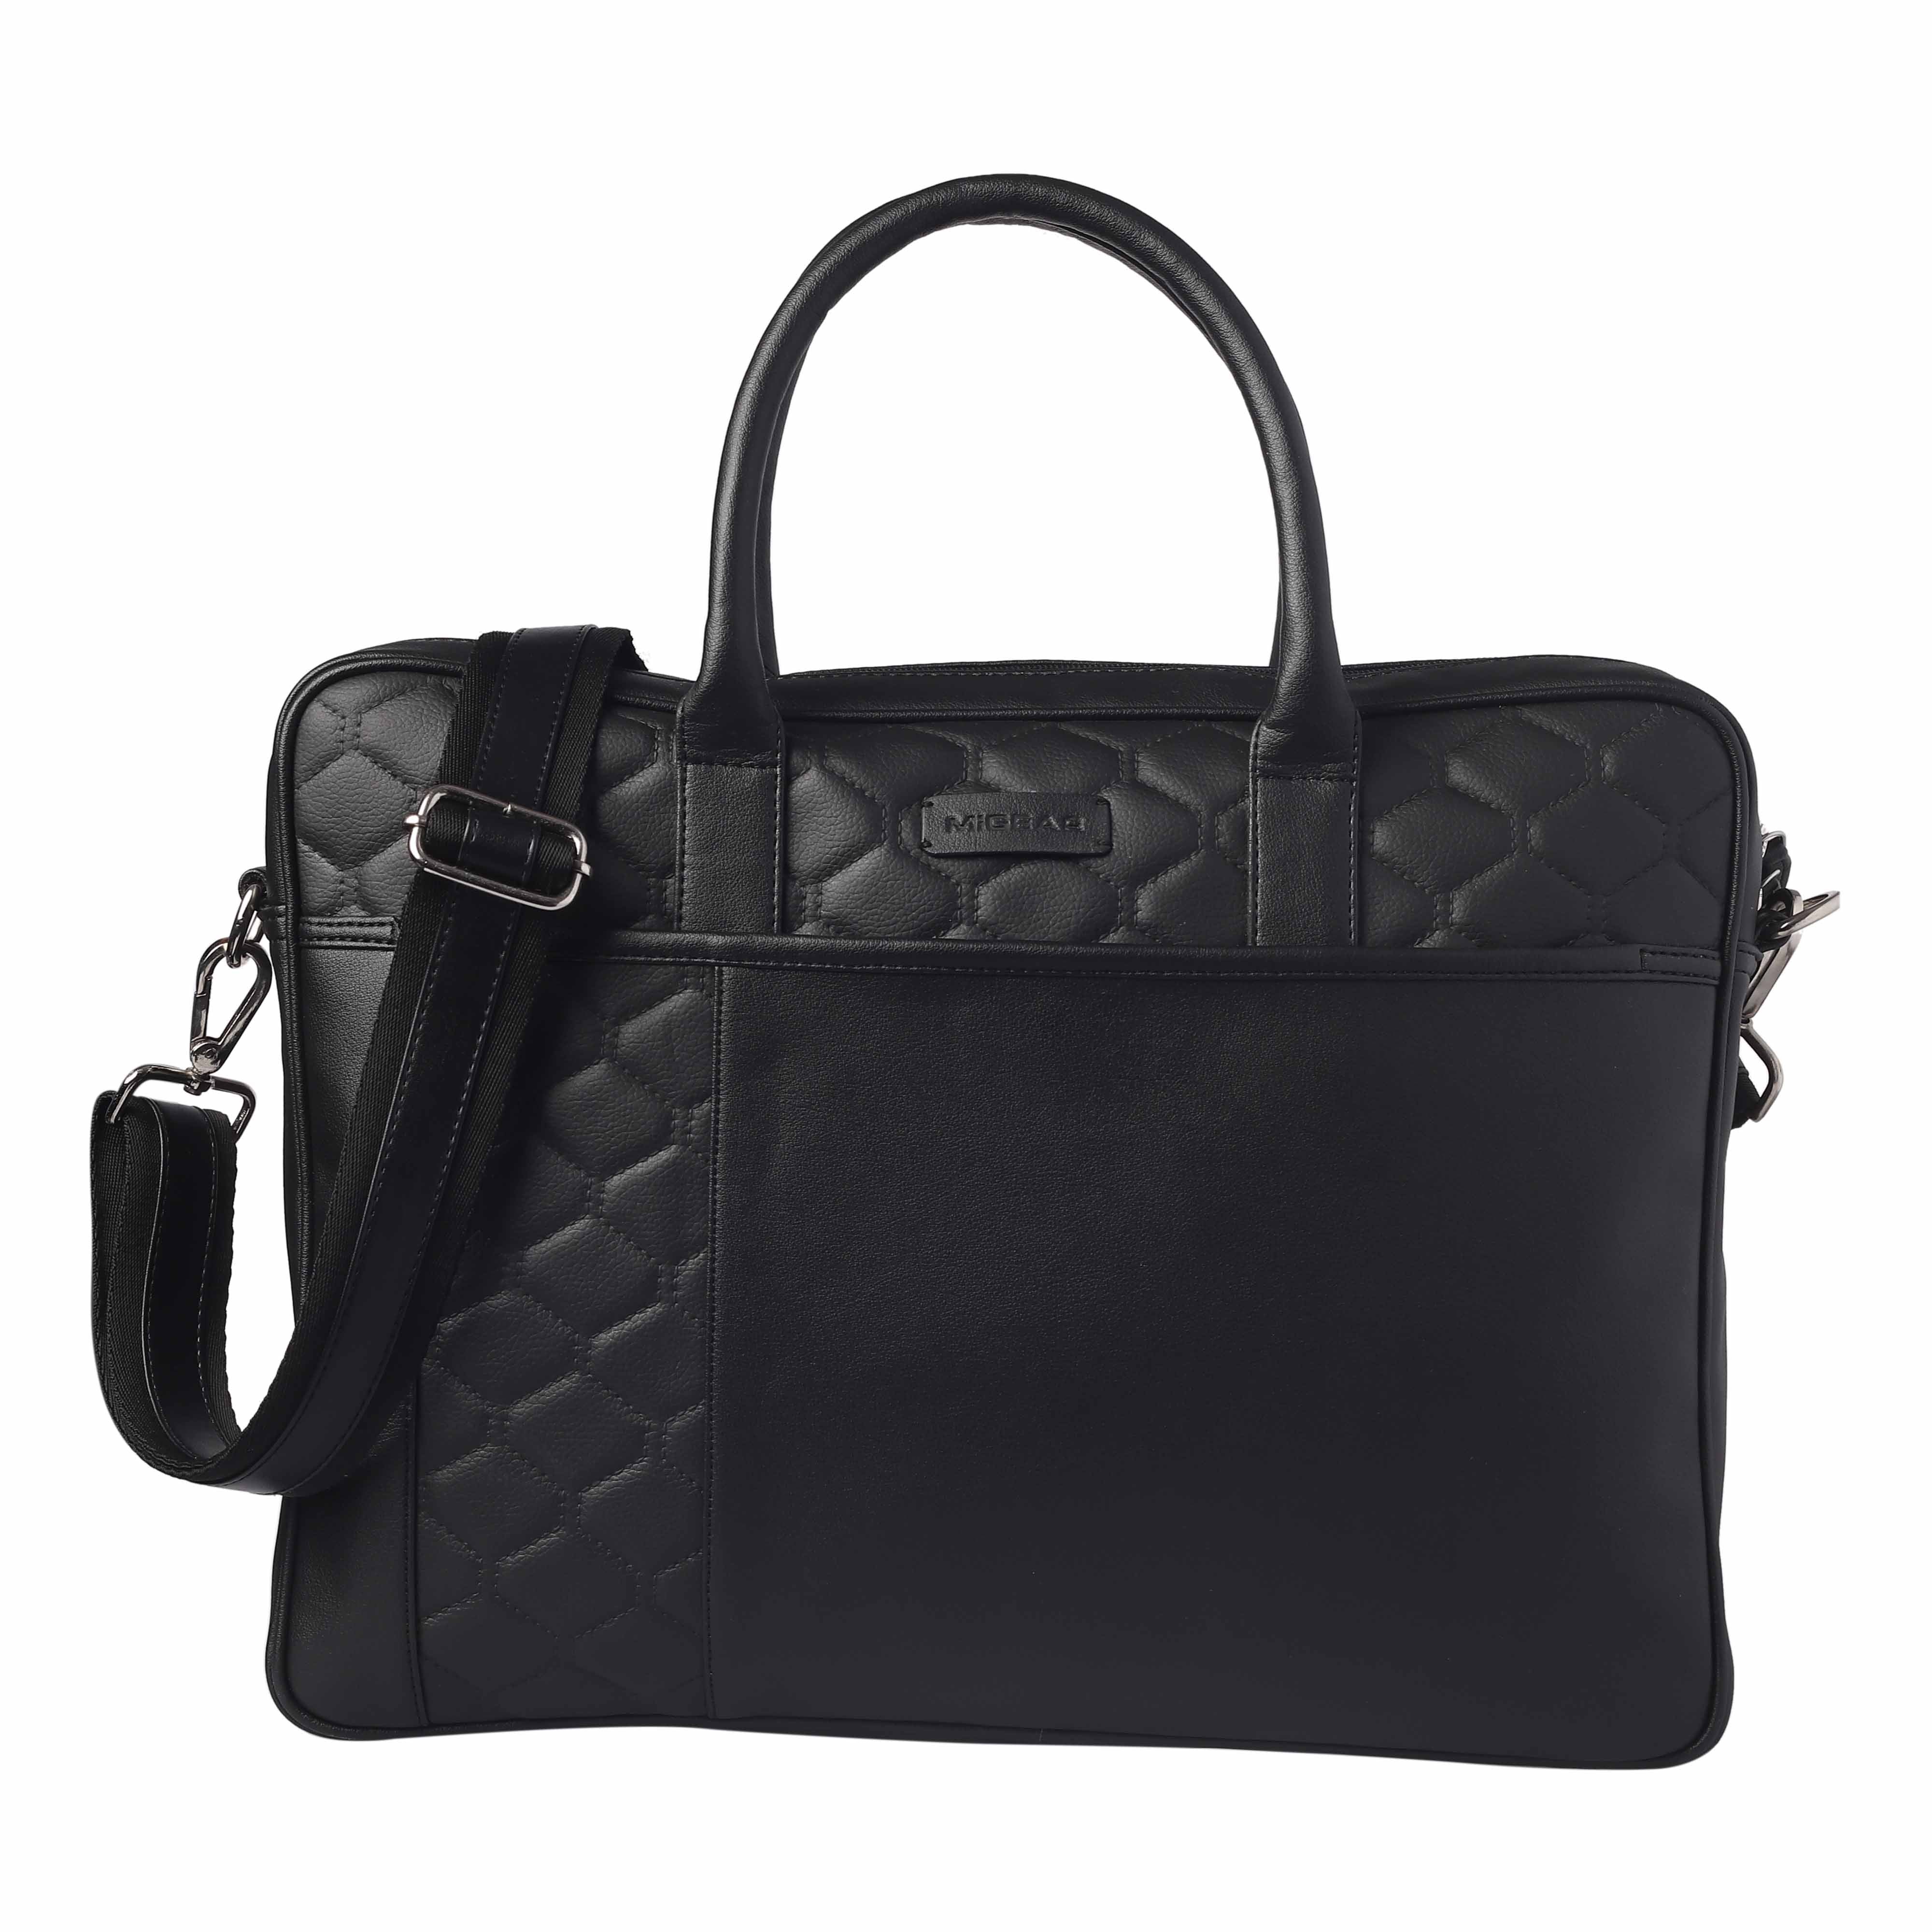 The Runway Quilted Laptop Bag